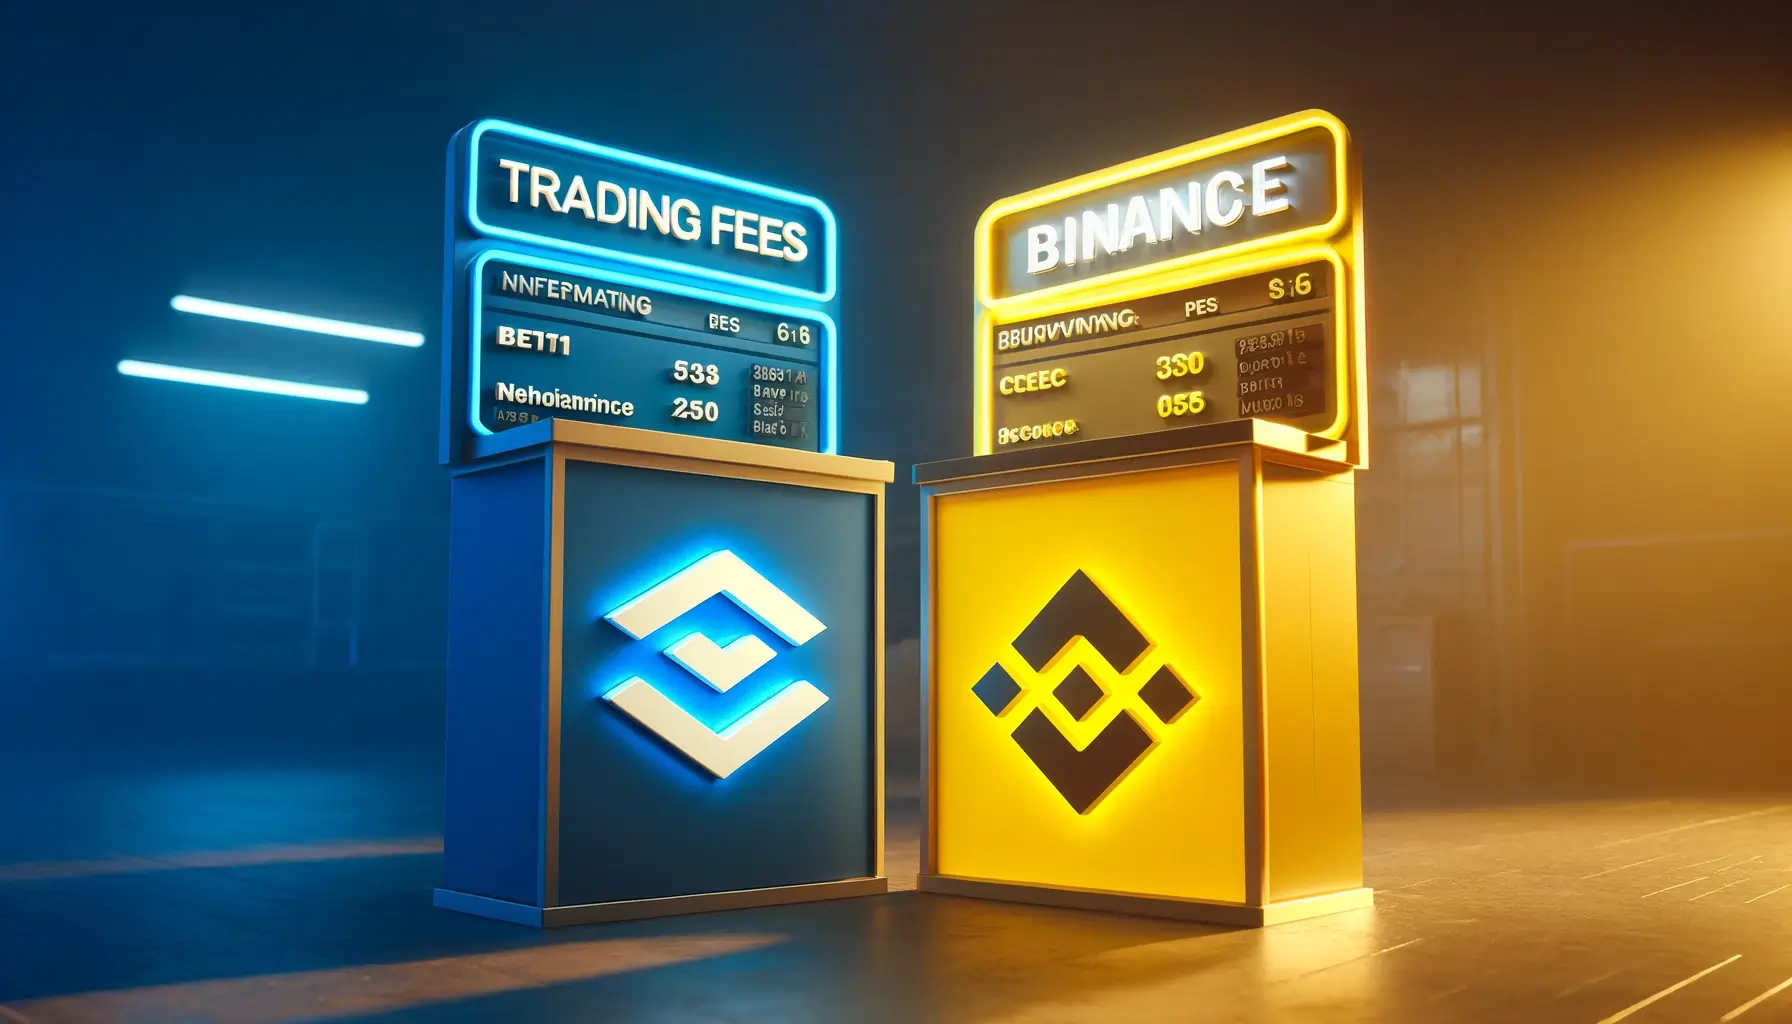 binance chain wallet charges higher fees